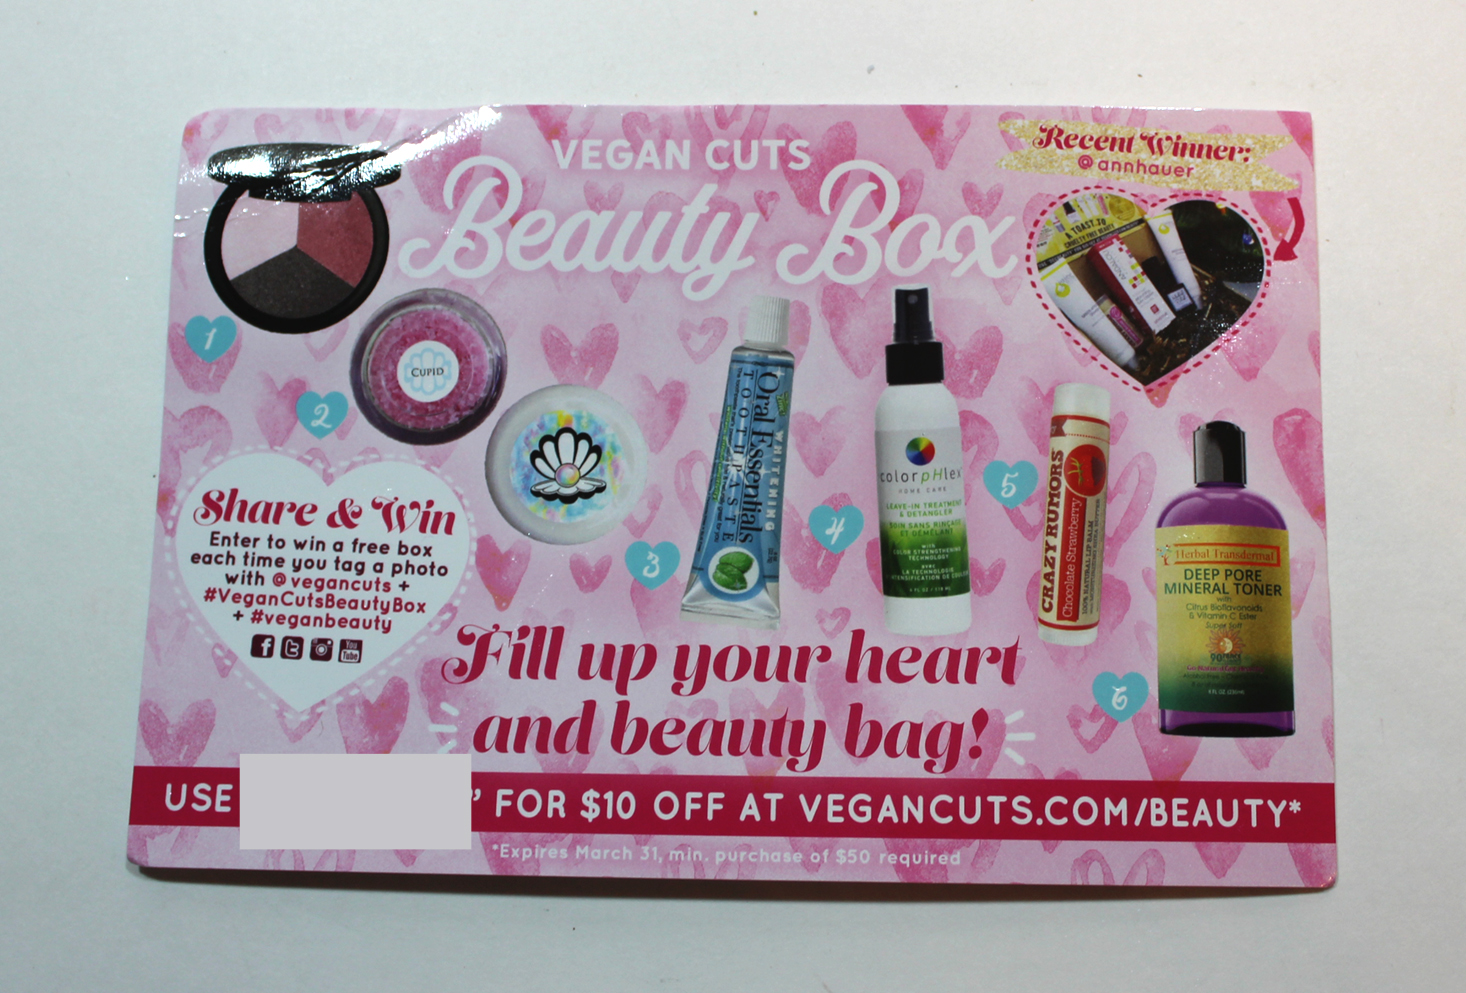 vegan-cuts-beauty-february-2017-booklet-front